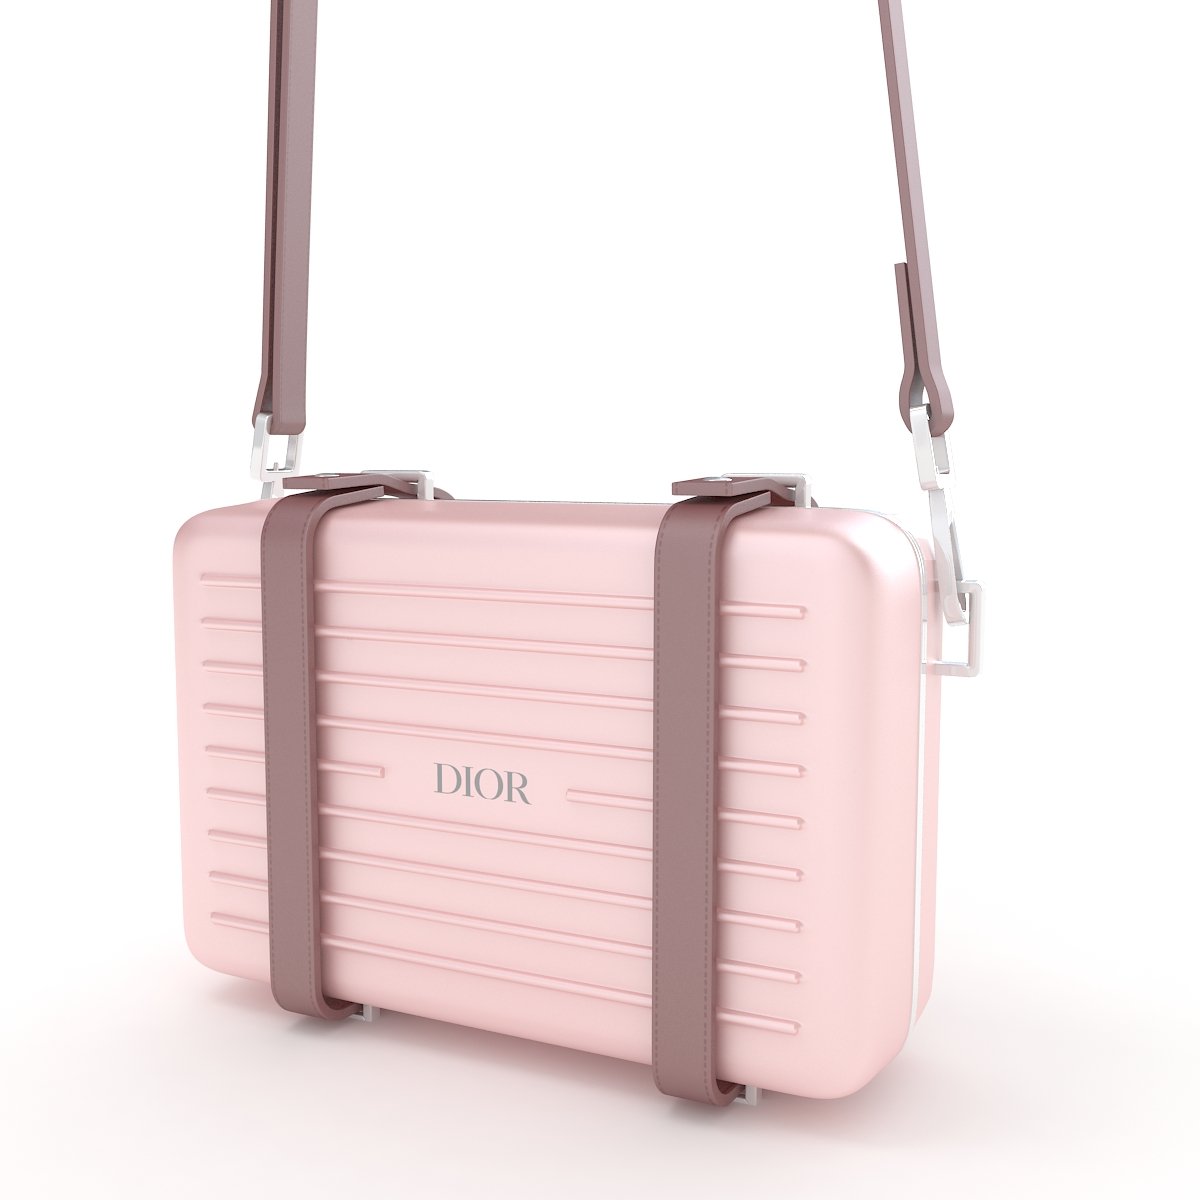 RIMOWA - In 2008, the product range is extended again: Now there